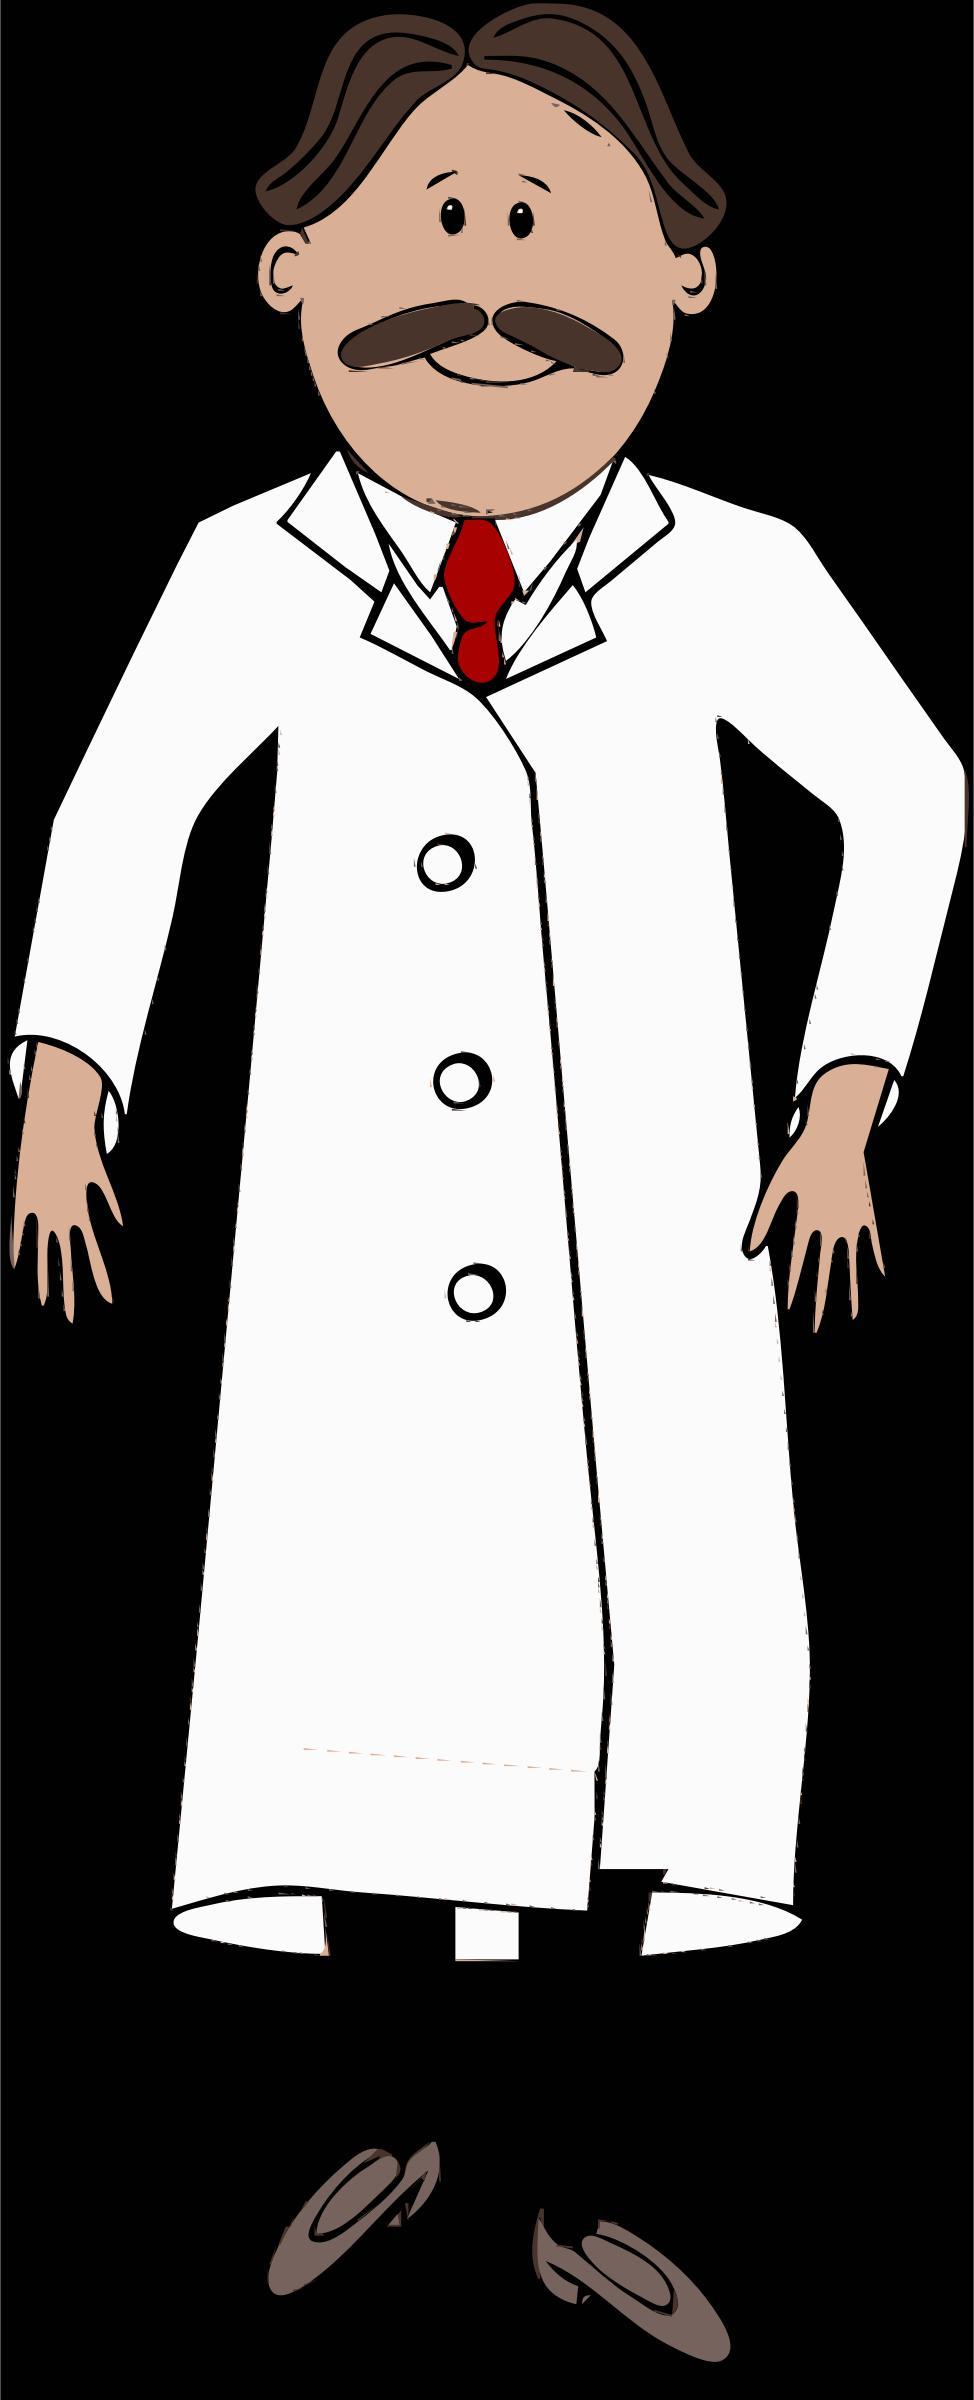 lab coat worn by scientist with mustache png transparent